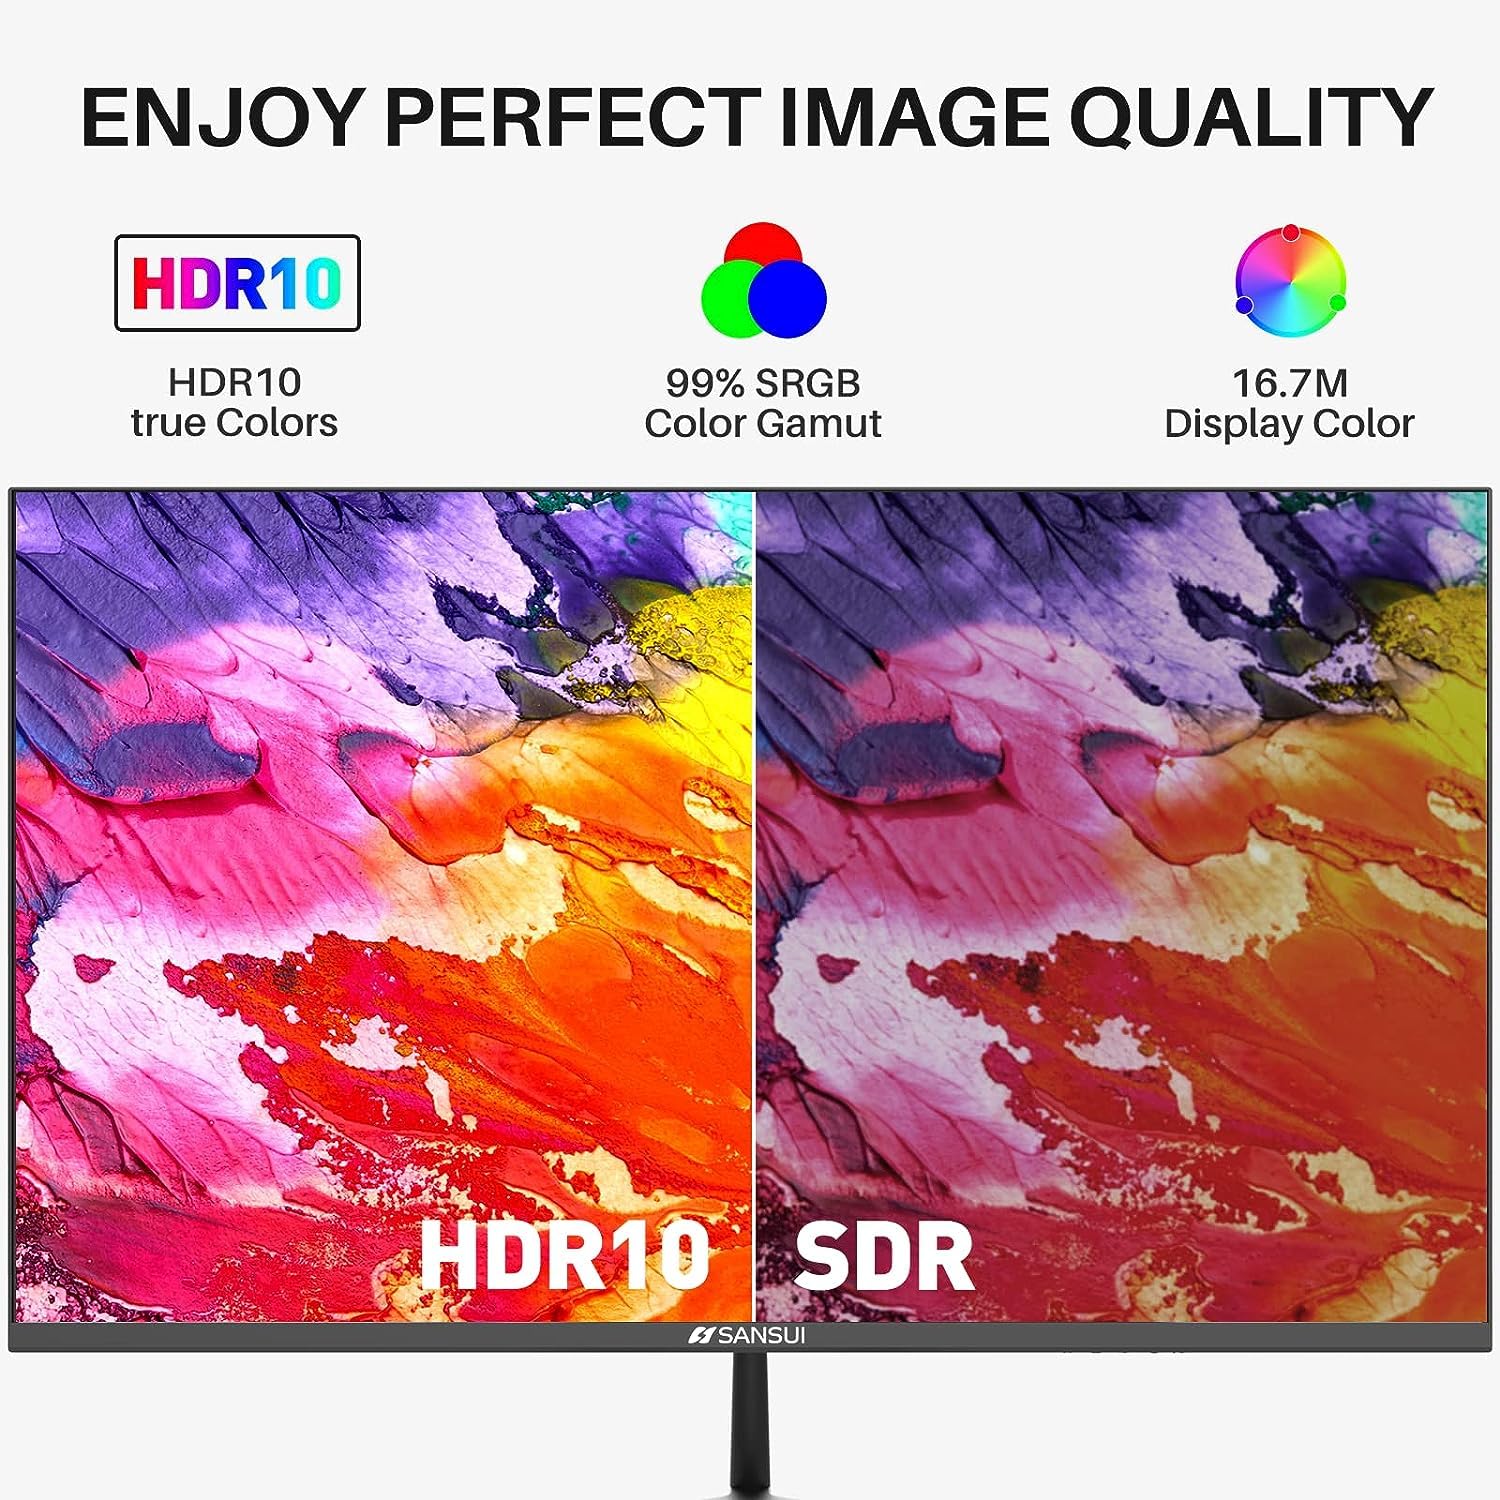 SANSUI Computer Monitors 27 inch 100Hz IPS FHD 1080P HDR10 Built-in Speakers HDMI VGA Ports Game RTS/FPS tilt Adjustable for Working and Gaming (ES-27X3L HDMI Cable Included)